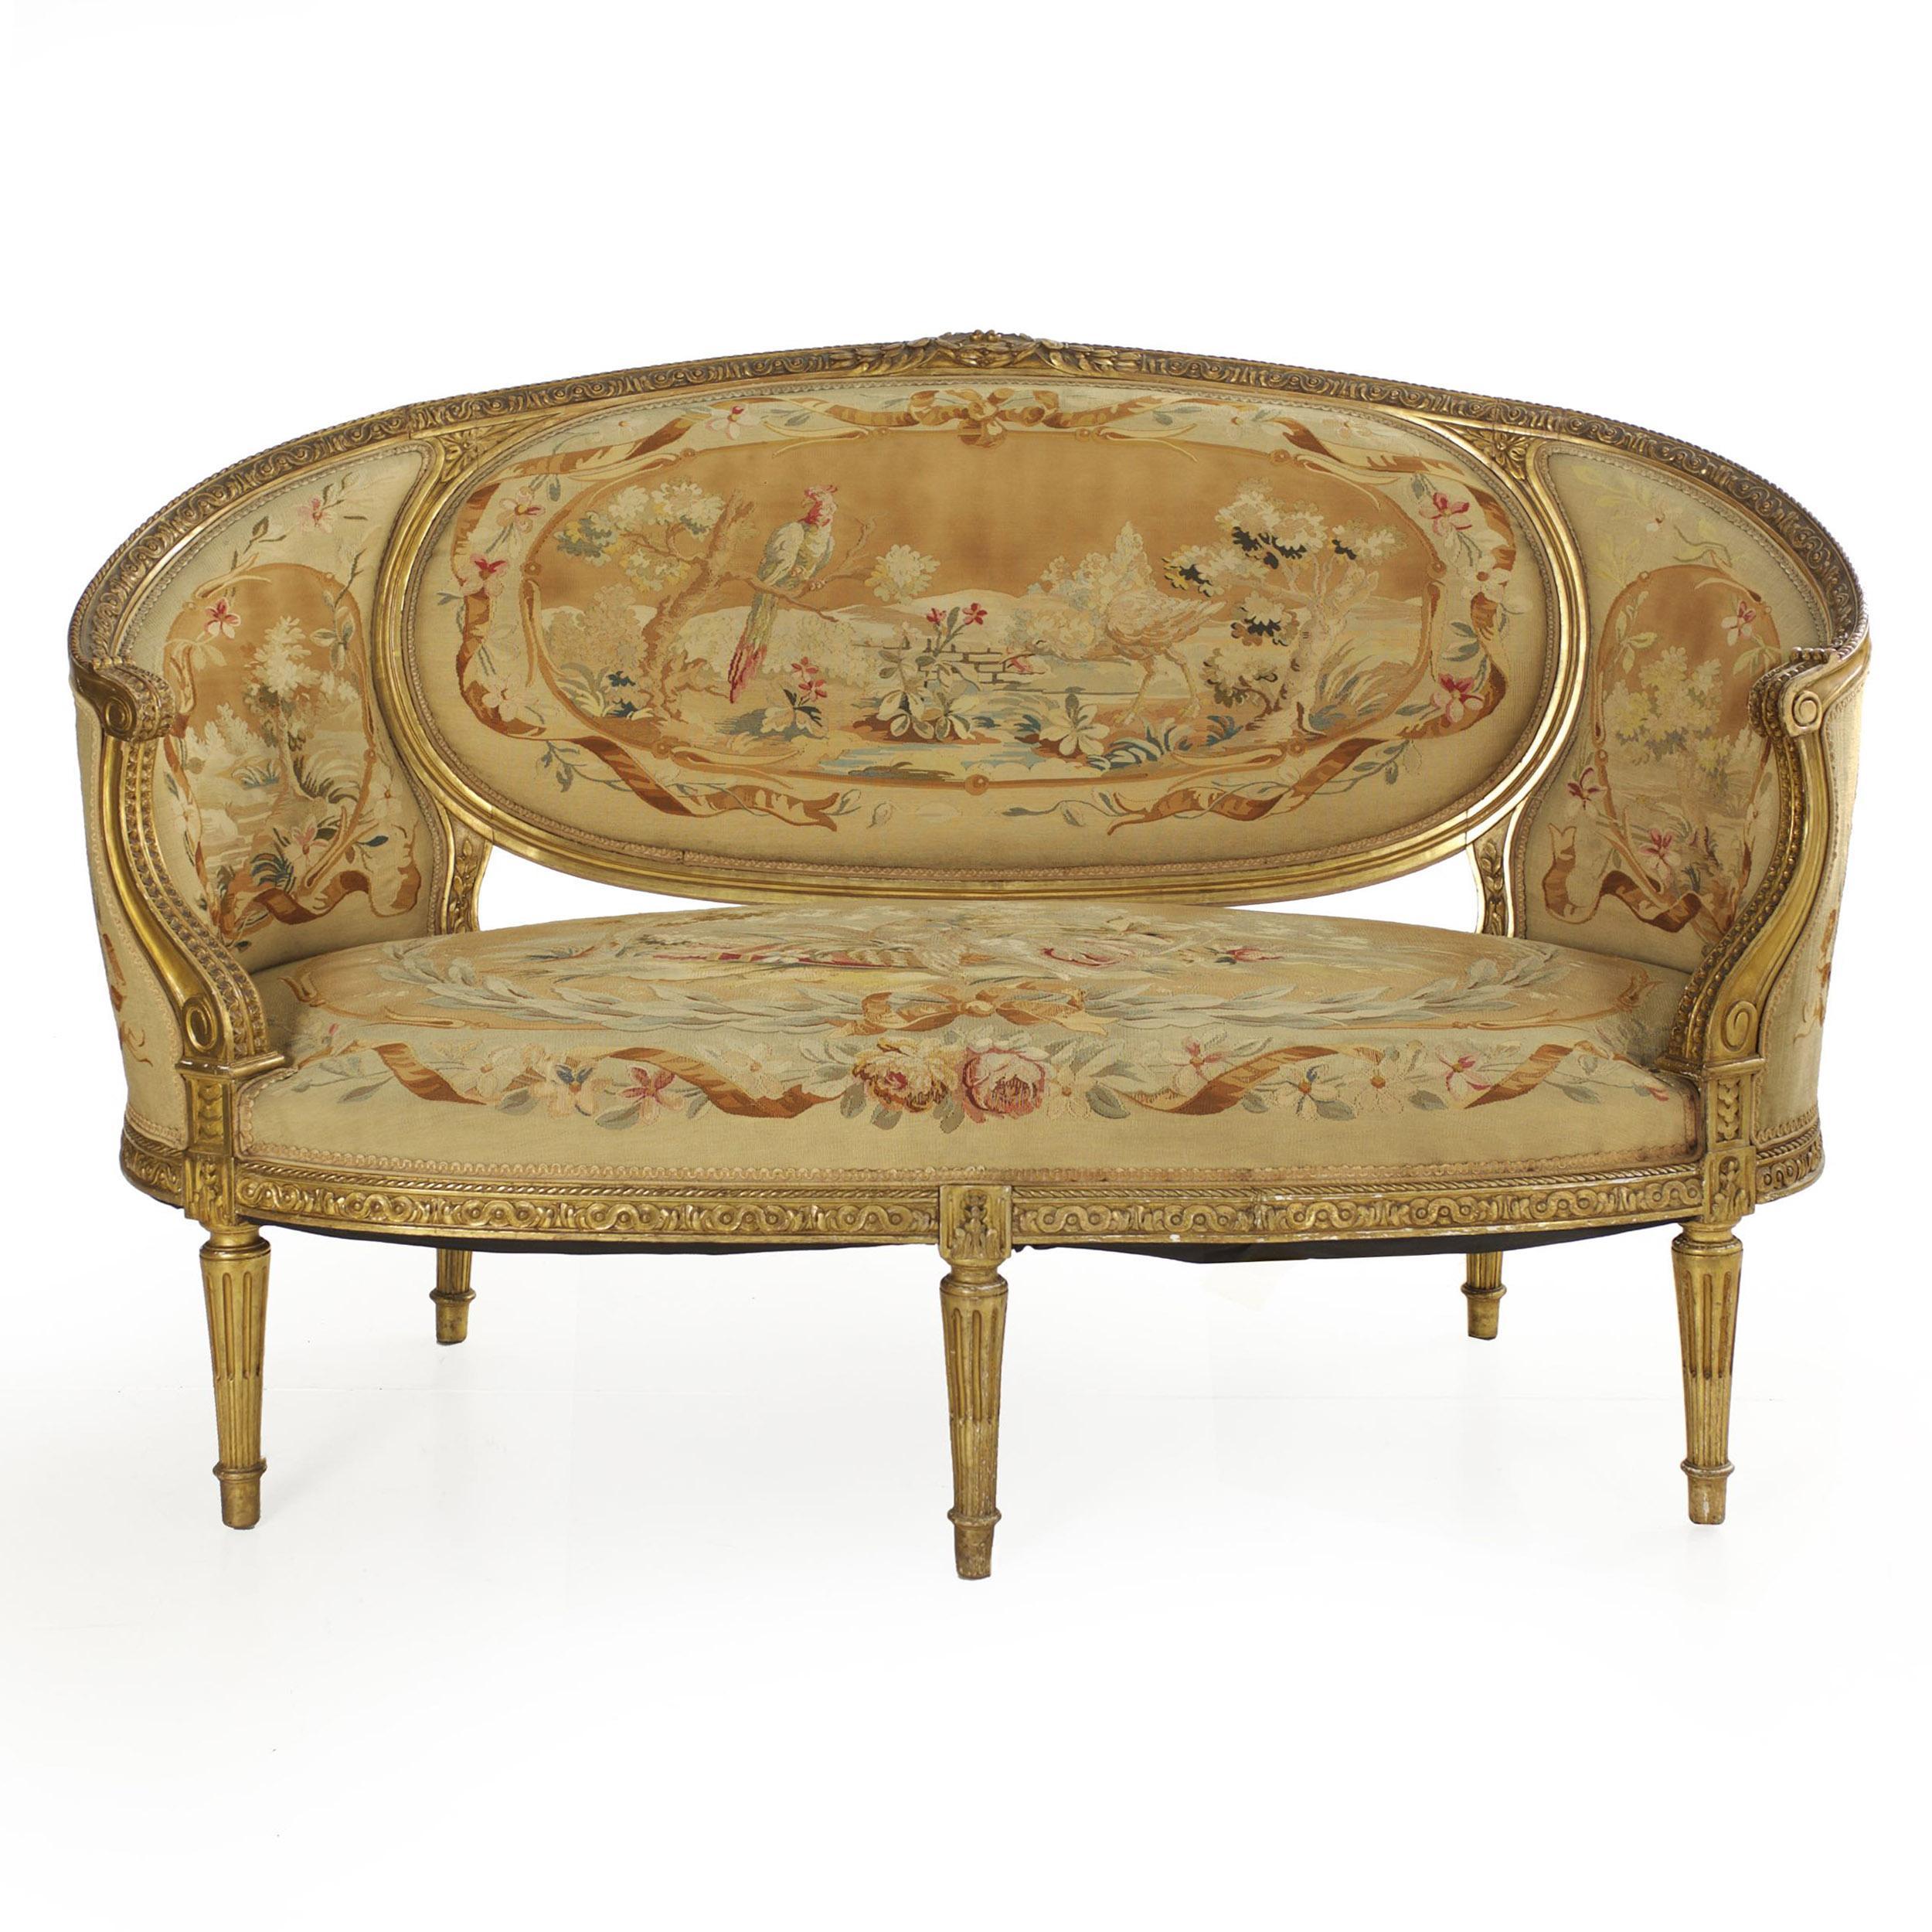 An exquisite and rare five-piece salon suite in the Louis XVI taste from the last quarter of the 19th century, it features a single canapé and four matched fauteuils covered in an original needlepoint Aubusson. The covering is incredibly